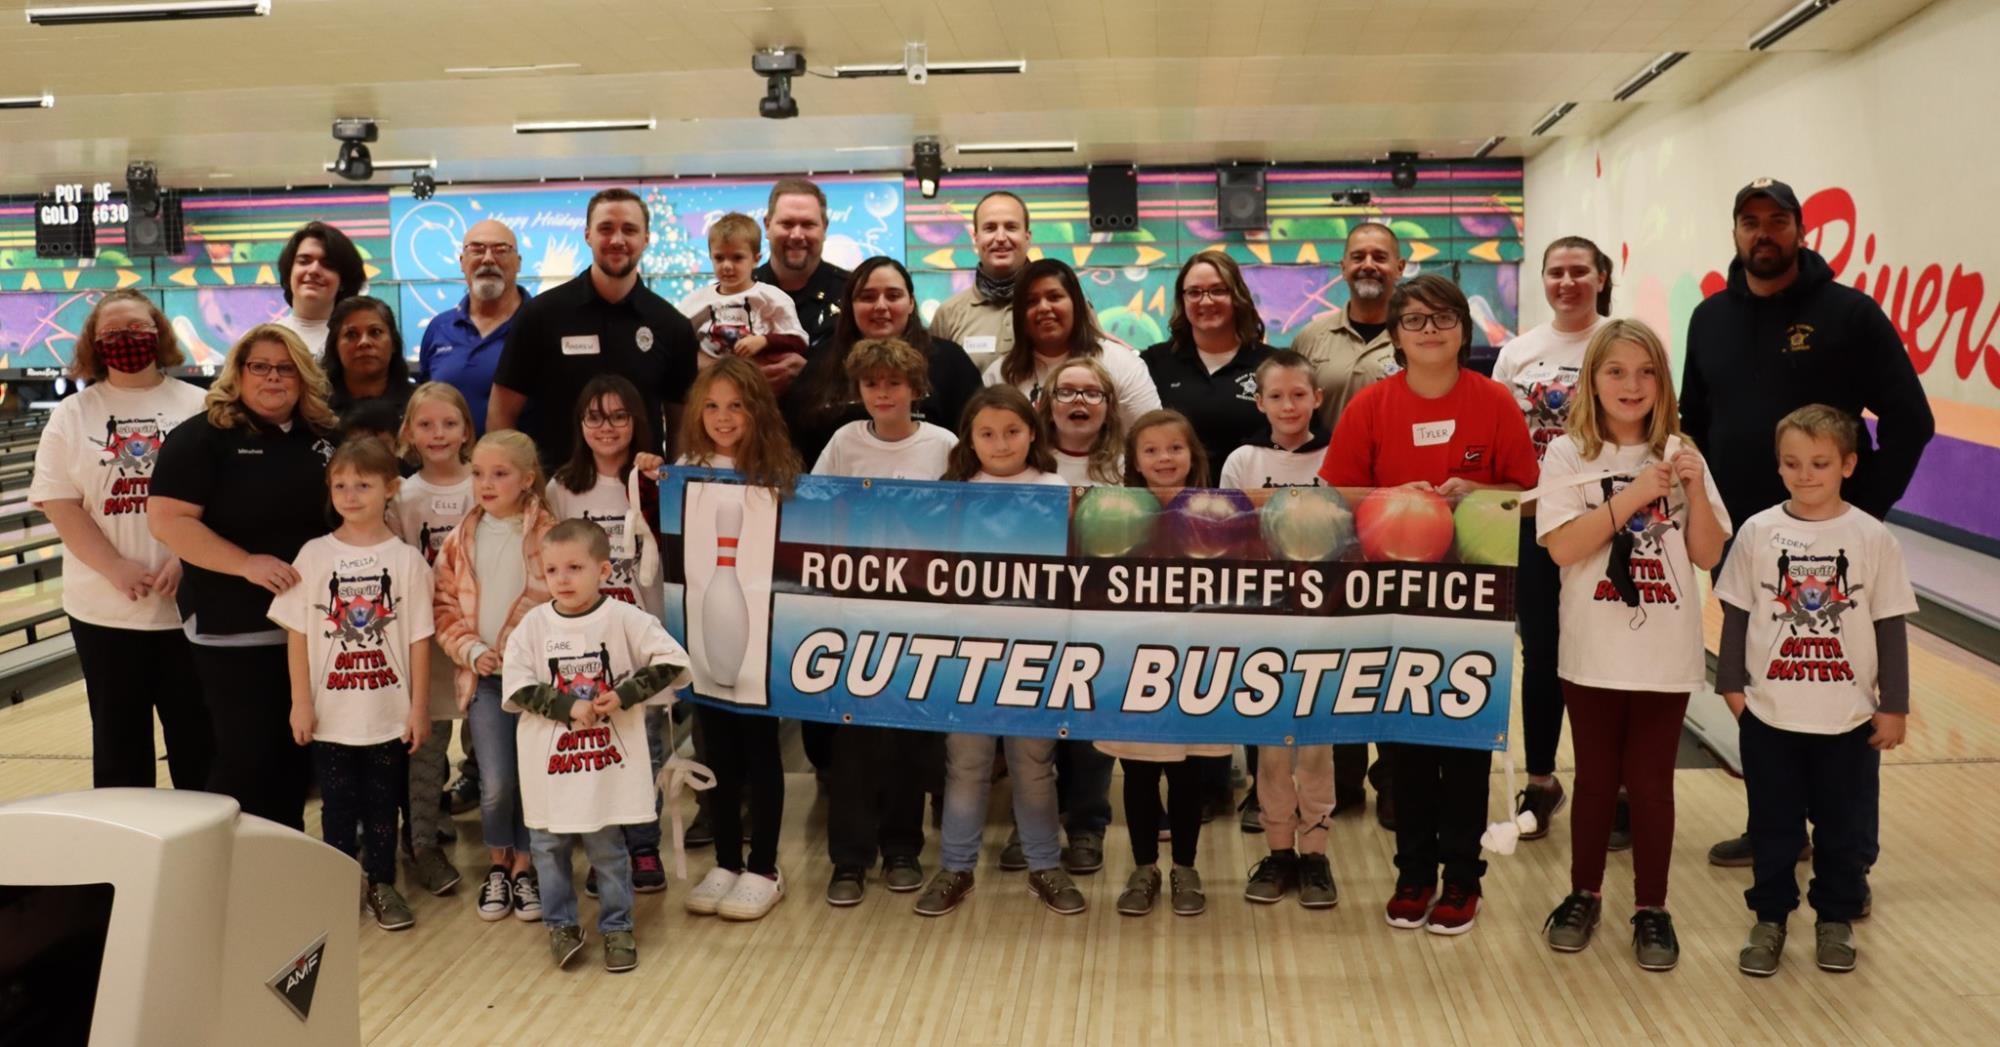 GUTTER BUSTERS GROUP PHOTO NOV. 13 2021